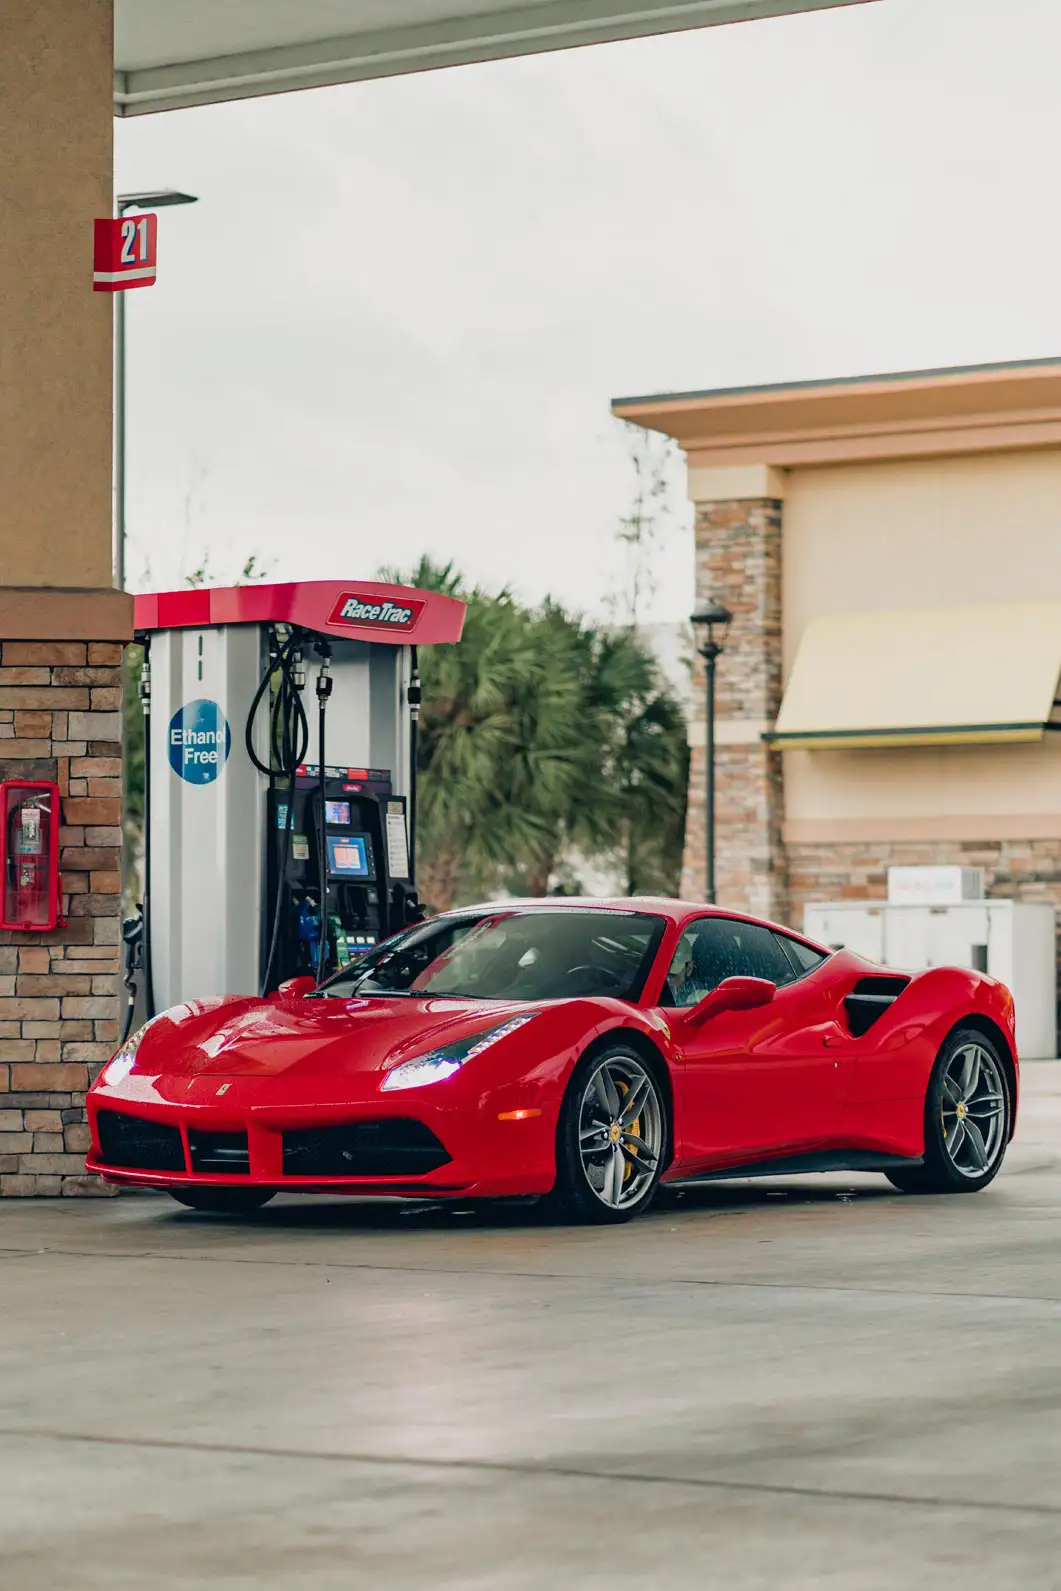 How filling up this car will look on your reservation: a sight that catches anyone's eye.